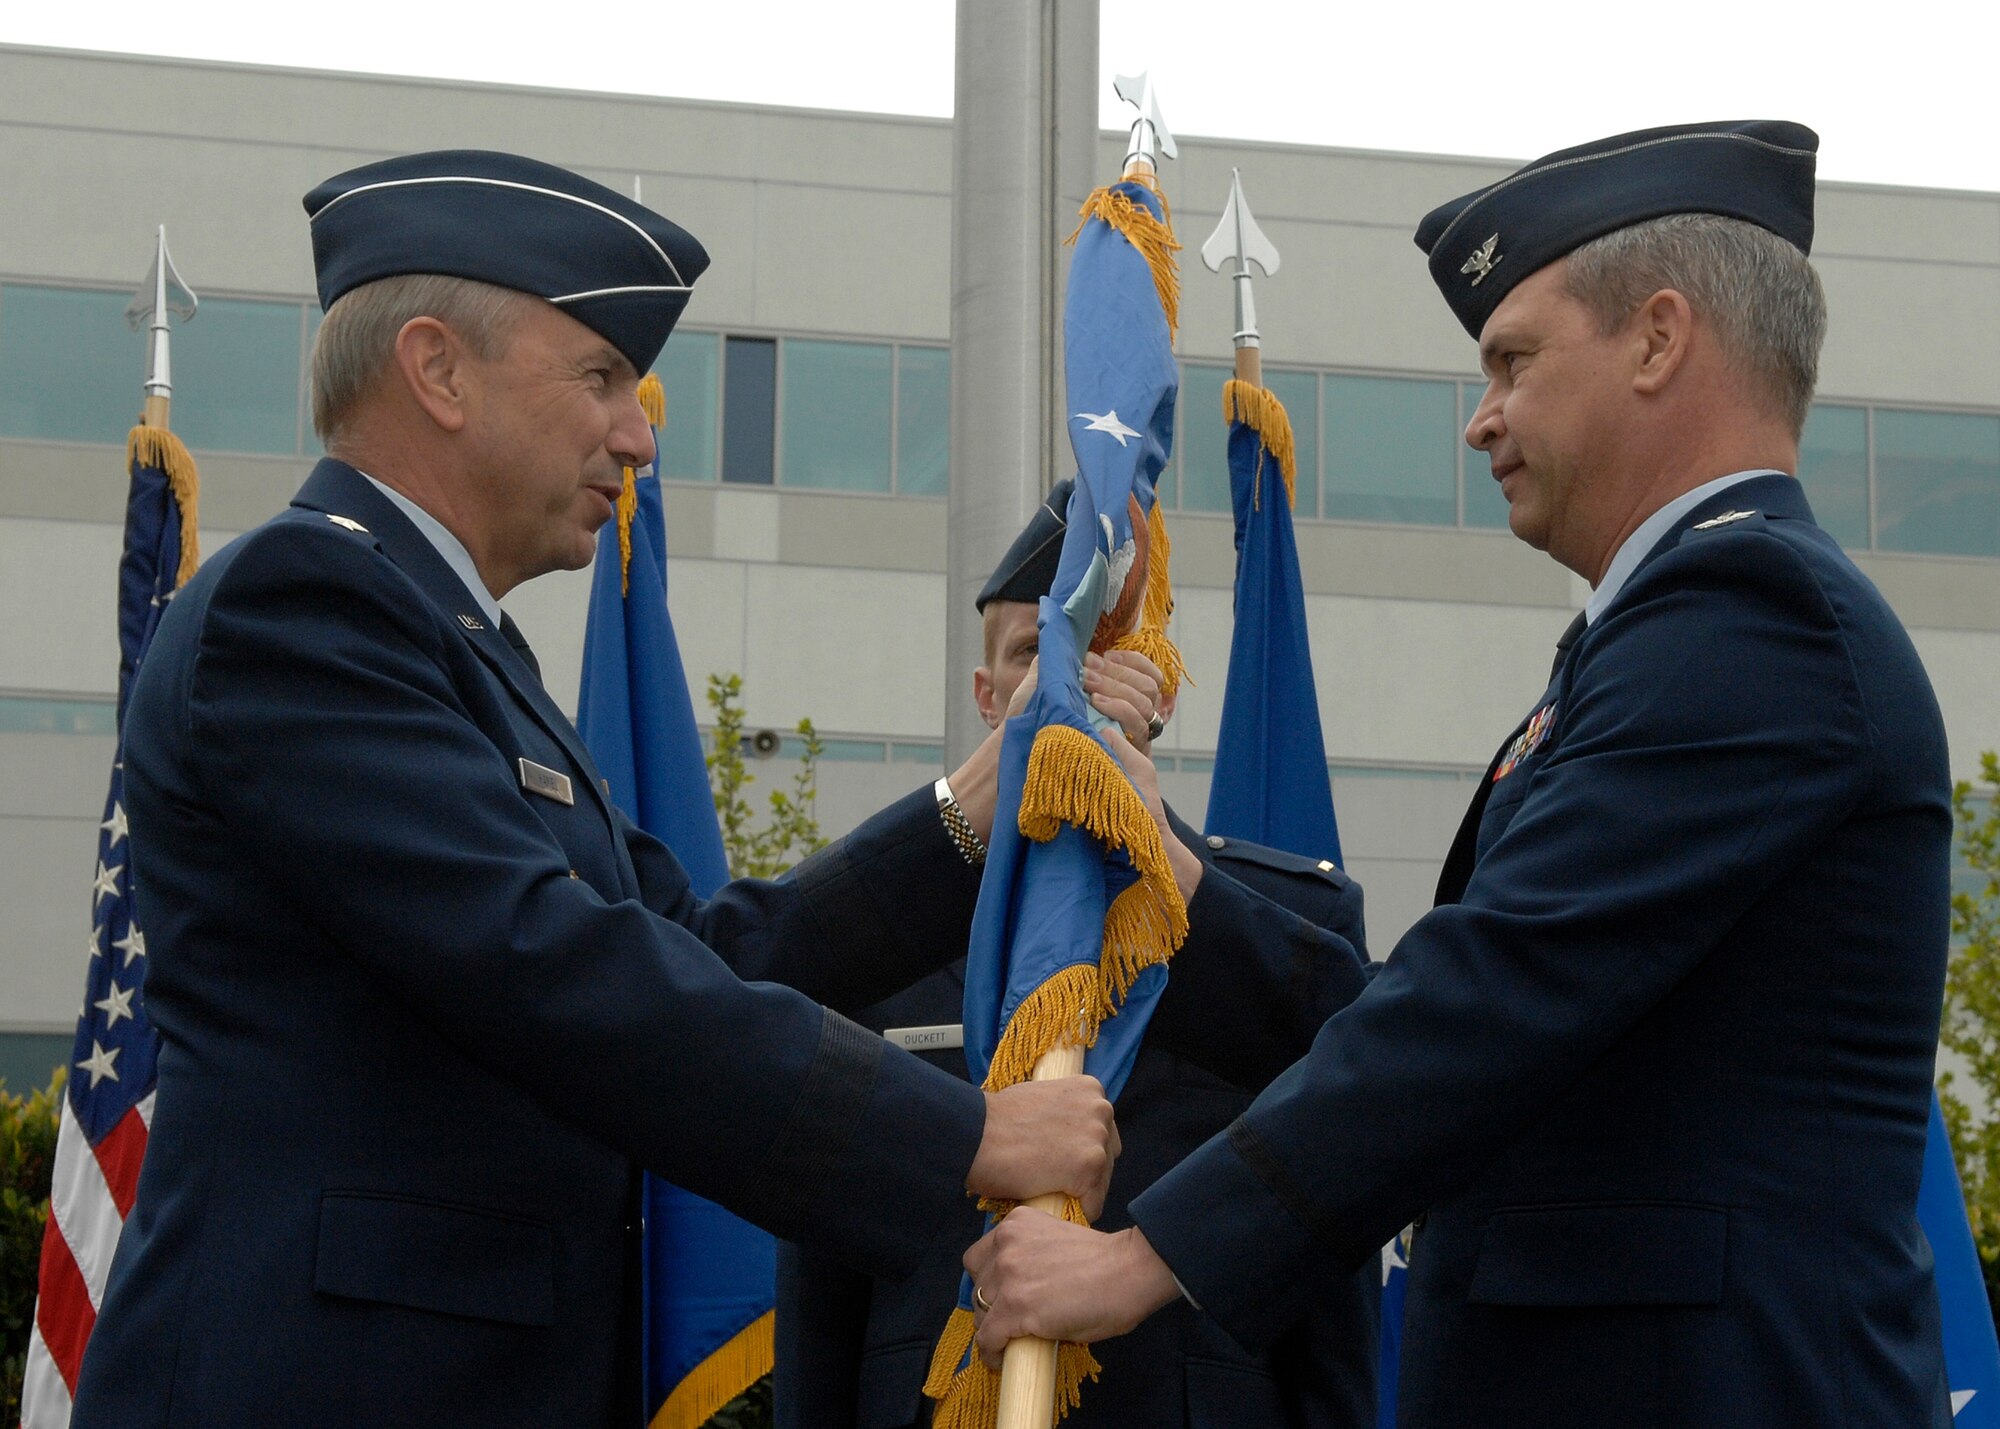 SMC Commander Lt. Gen. Michael Hamel passes the guide-on to Col. Christopher Pelc during a ceremony that marked the activation of SMC's Missile Defense Systems Group, April 1. Col. Pelc accepted the flag and assumes the title as the Group's Director. He will be responsible for activities associated with program execution of the Space Tracking and Surveillance System research and development program, Near Field Infrared Experiment and Advanced Technology Risk Reduction effort. (Photo by Stephen Schester)